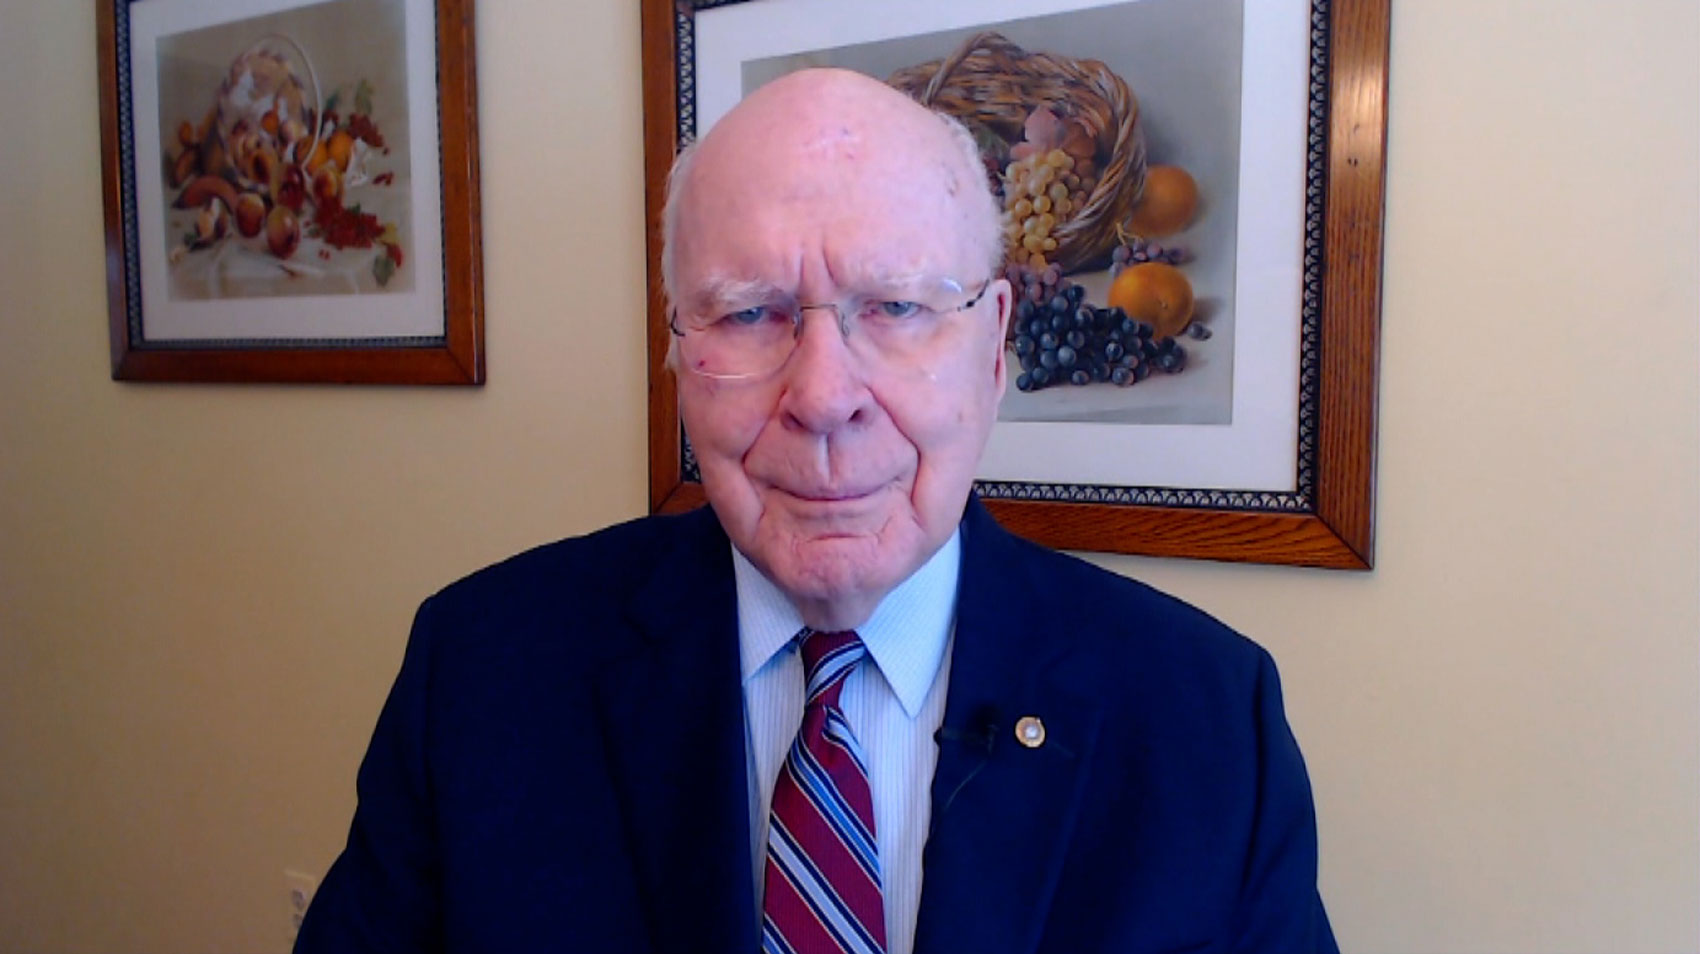 Senate Appropriations Chairman Patrick Leahy on February 19.